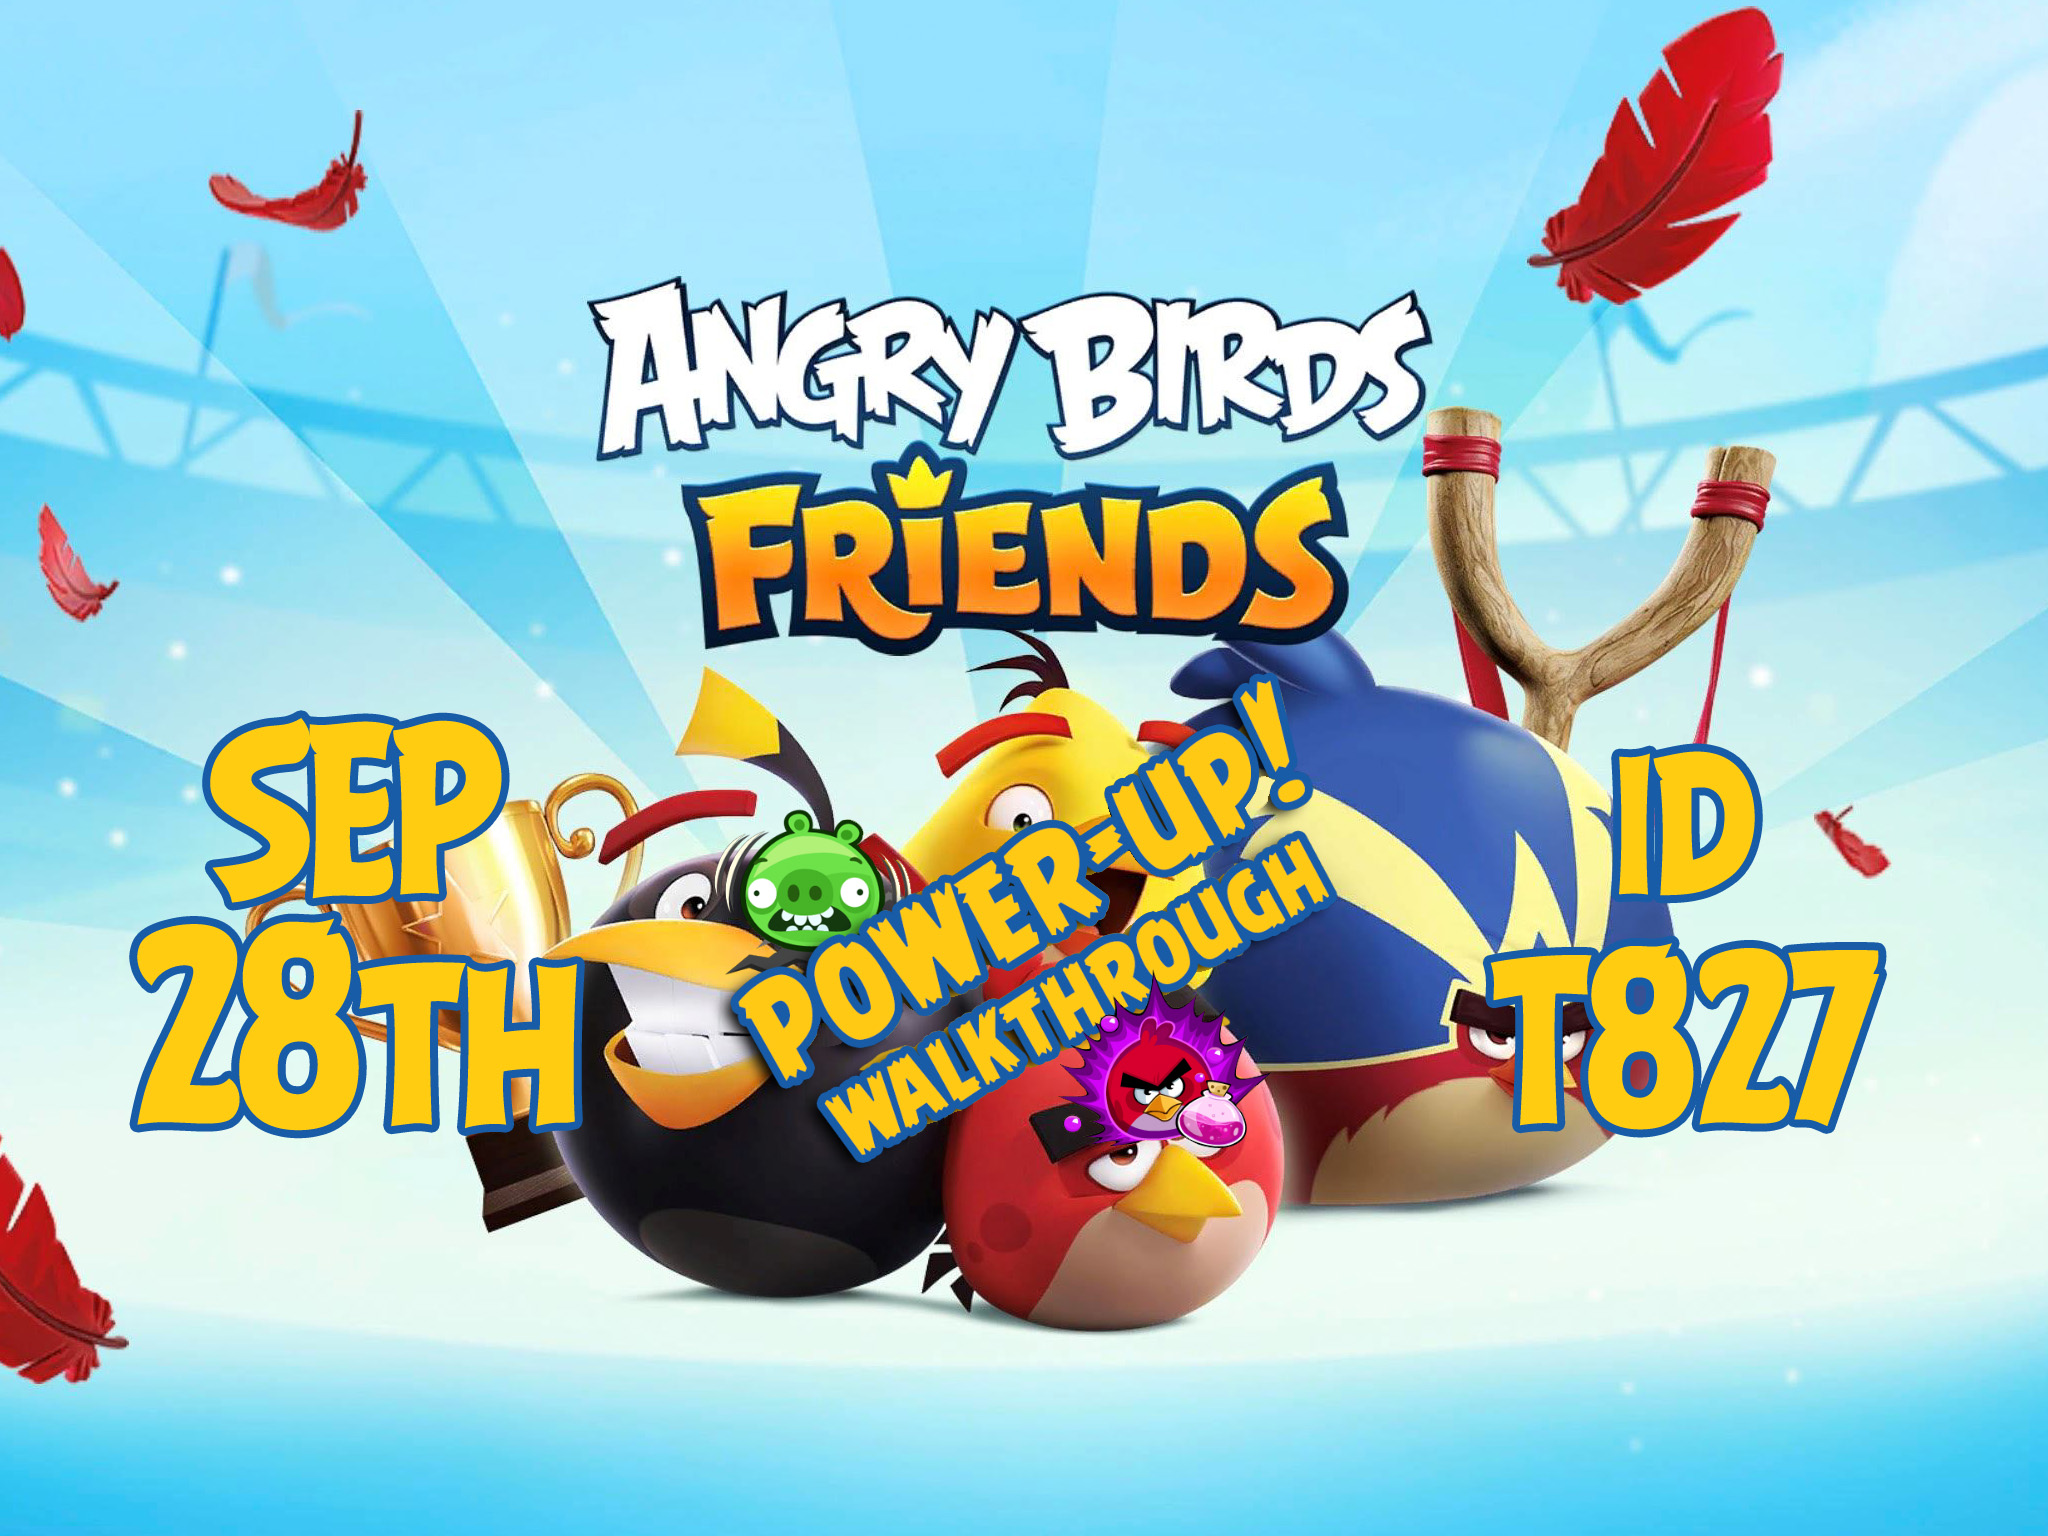 Angry-Birds-Friends-Tournament-T827-Feature-Image-PU